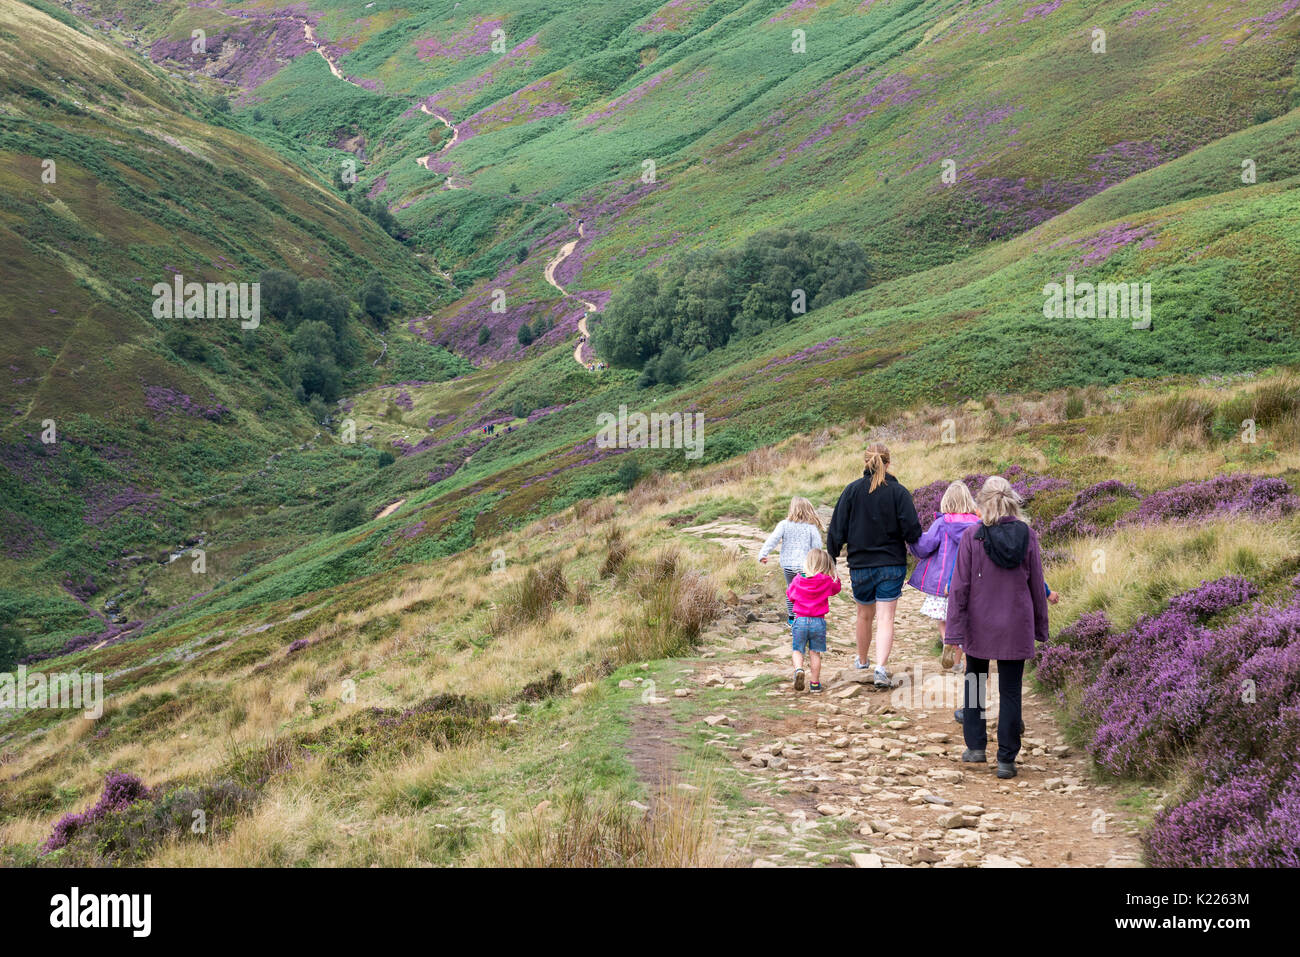 Family group of women and children enjoying a summer walk in the hills of the Peak District at Edale in Derbyshire, England. Stock Photo